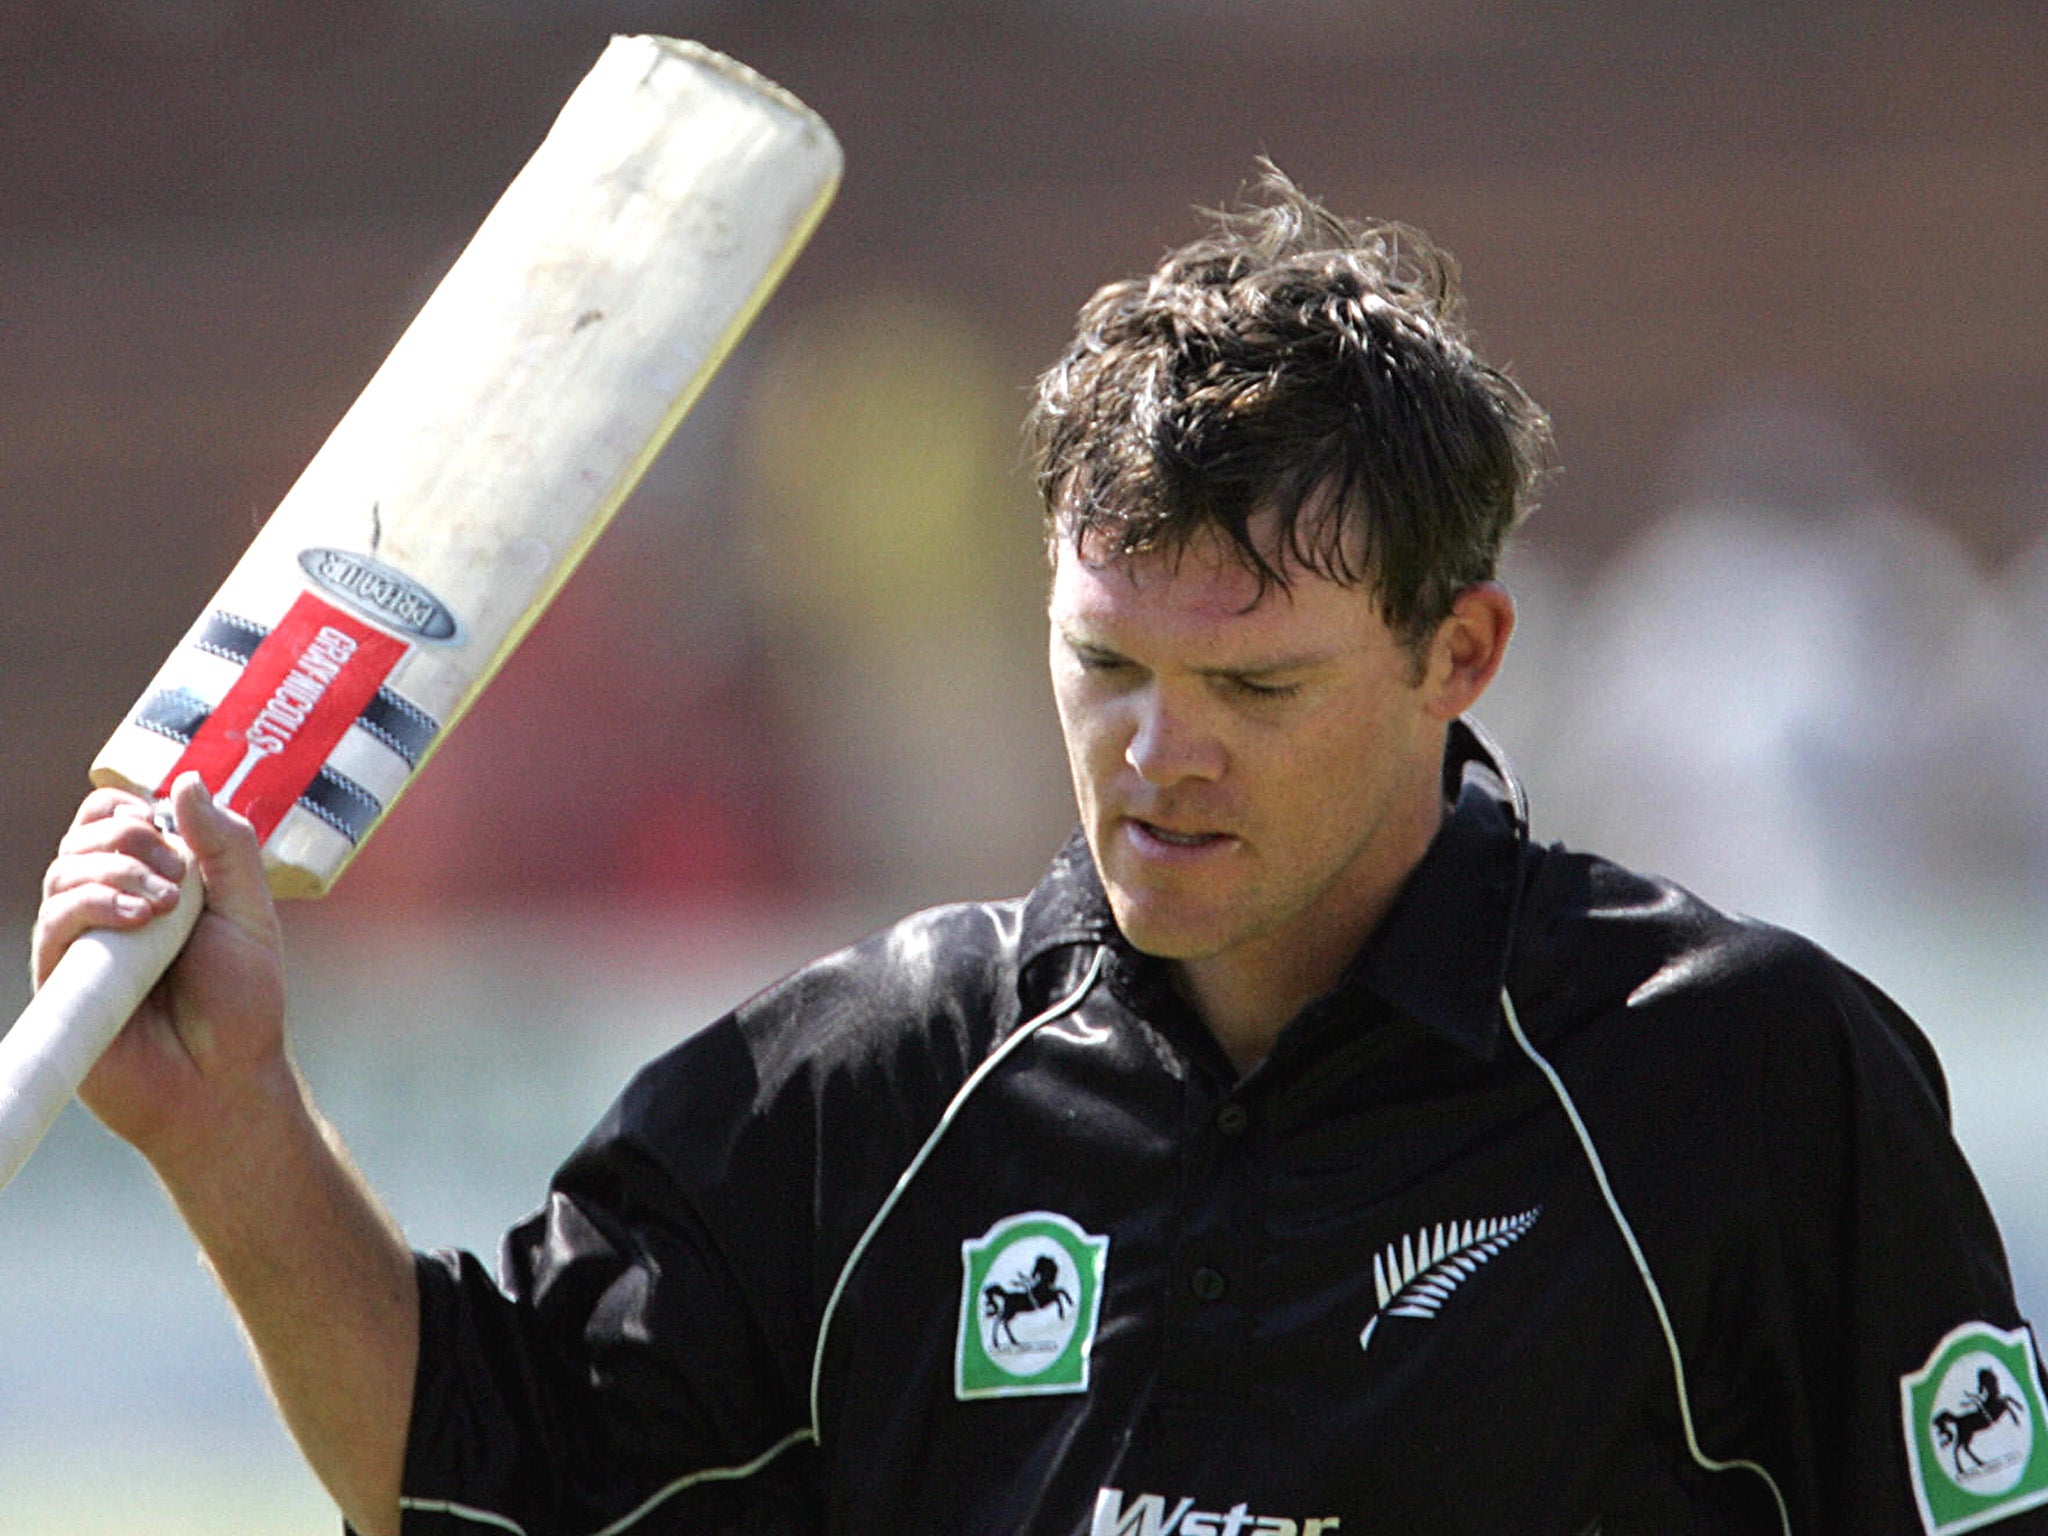 Lou Vincent got involved in fixing when he first played in the Indian Cricket League in 2008